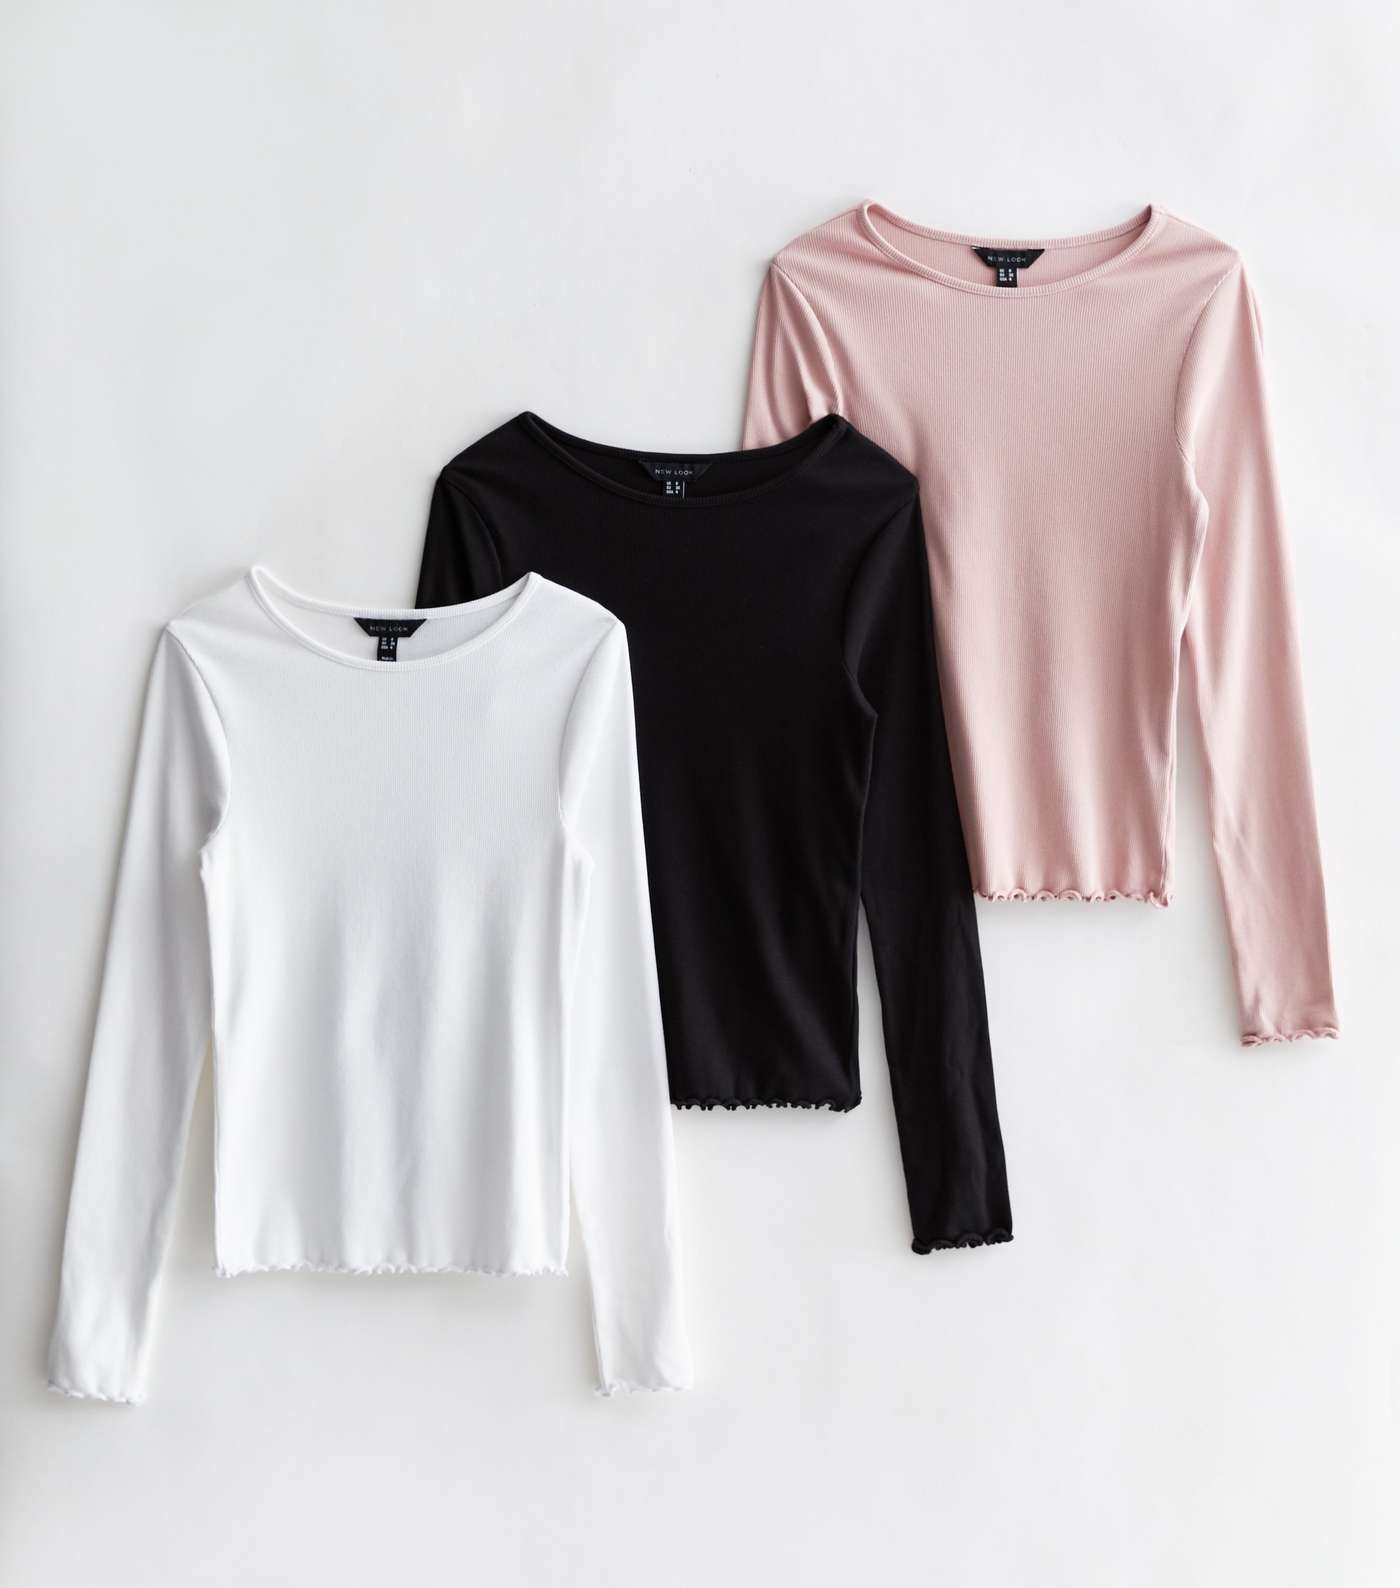 3 Pack Pink and Black White Frill Trim Long Sleeve Tops Image 5